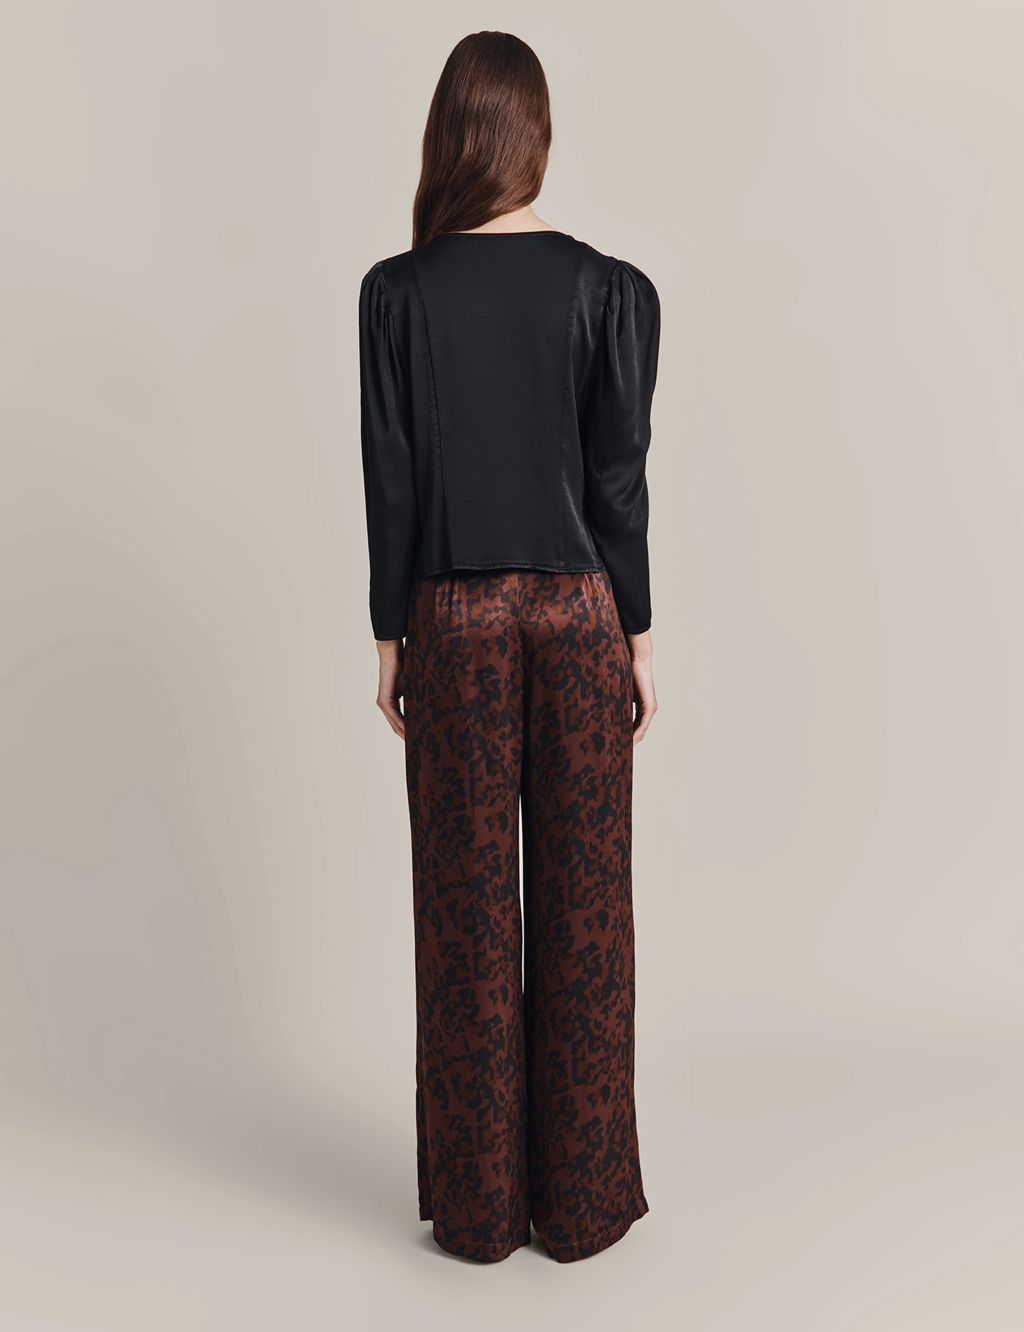 Leopard Printed Crushed Velvet Wide Leg Trousers